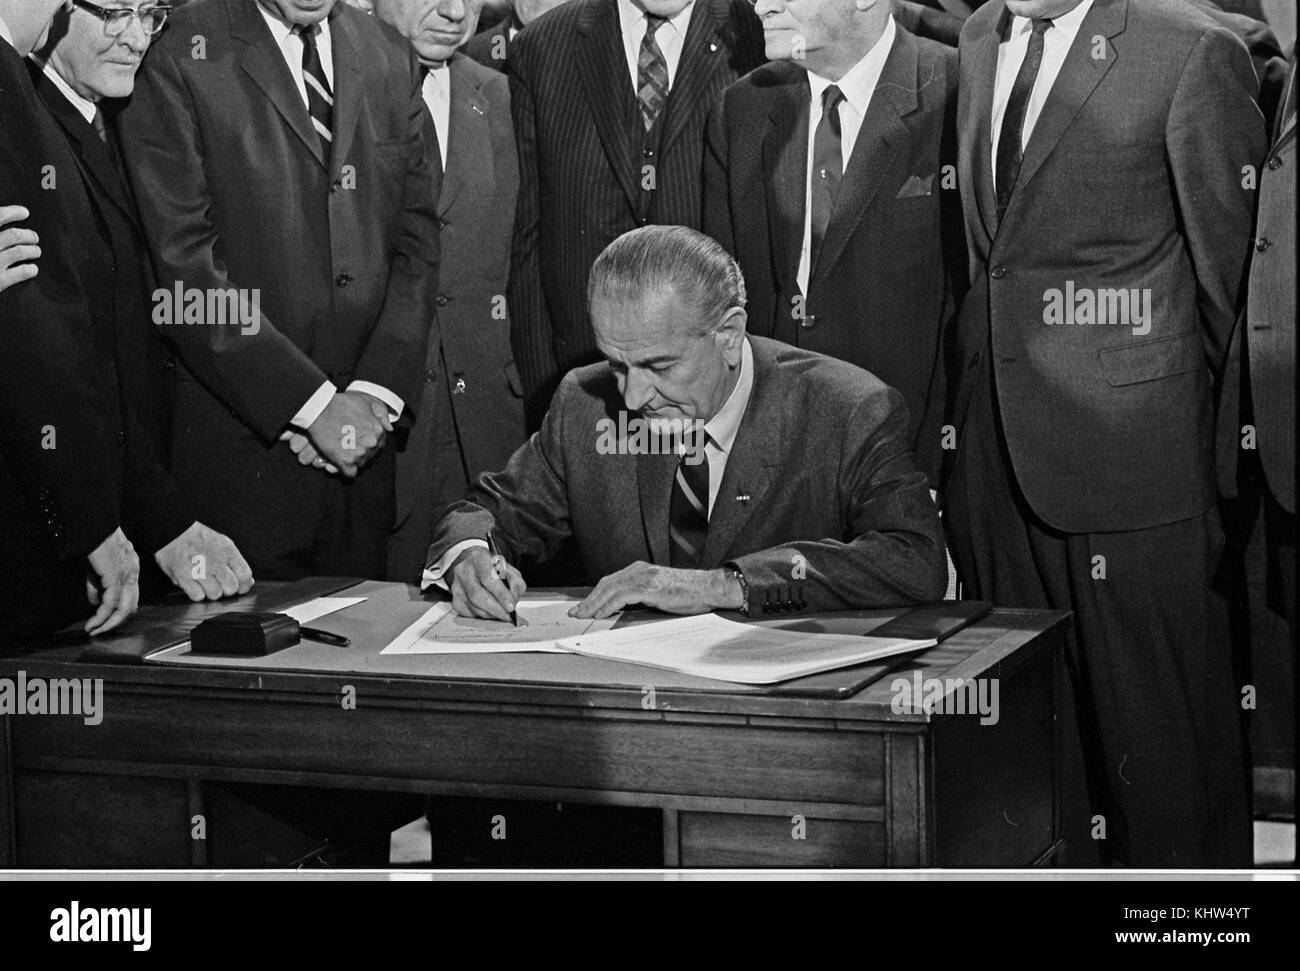 Photograph of President Lyndon B. Johnson signing the 1968 Civil Rights Bill. Lyndon B. Johnson (1908-1973) an American politician and 36th President of the United States. Dated 20th Century Stock Photo